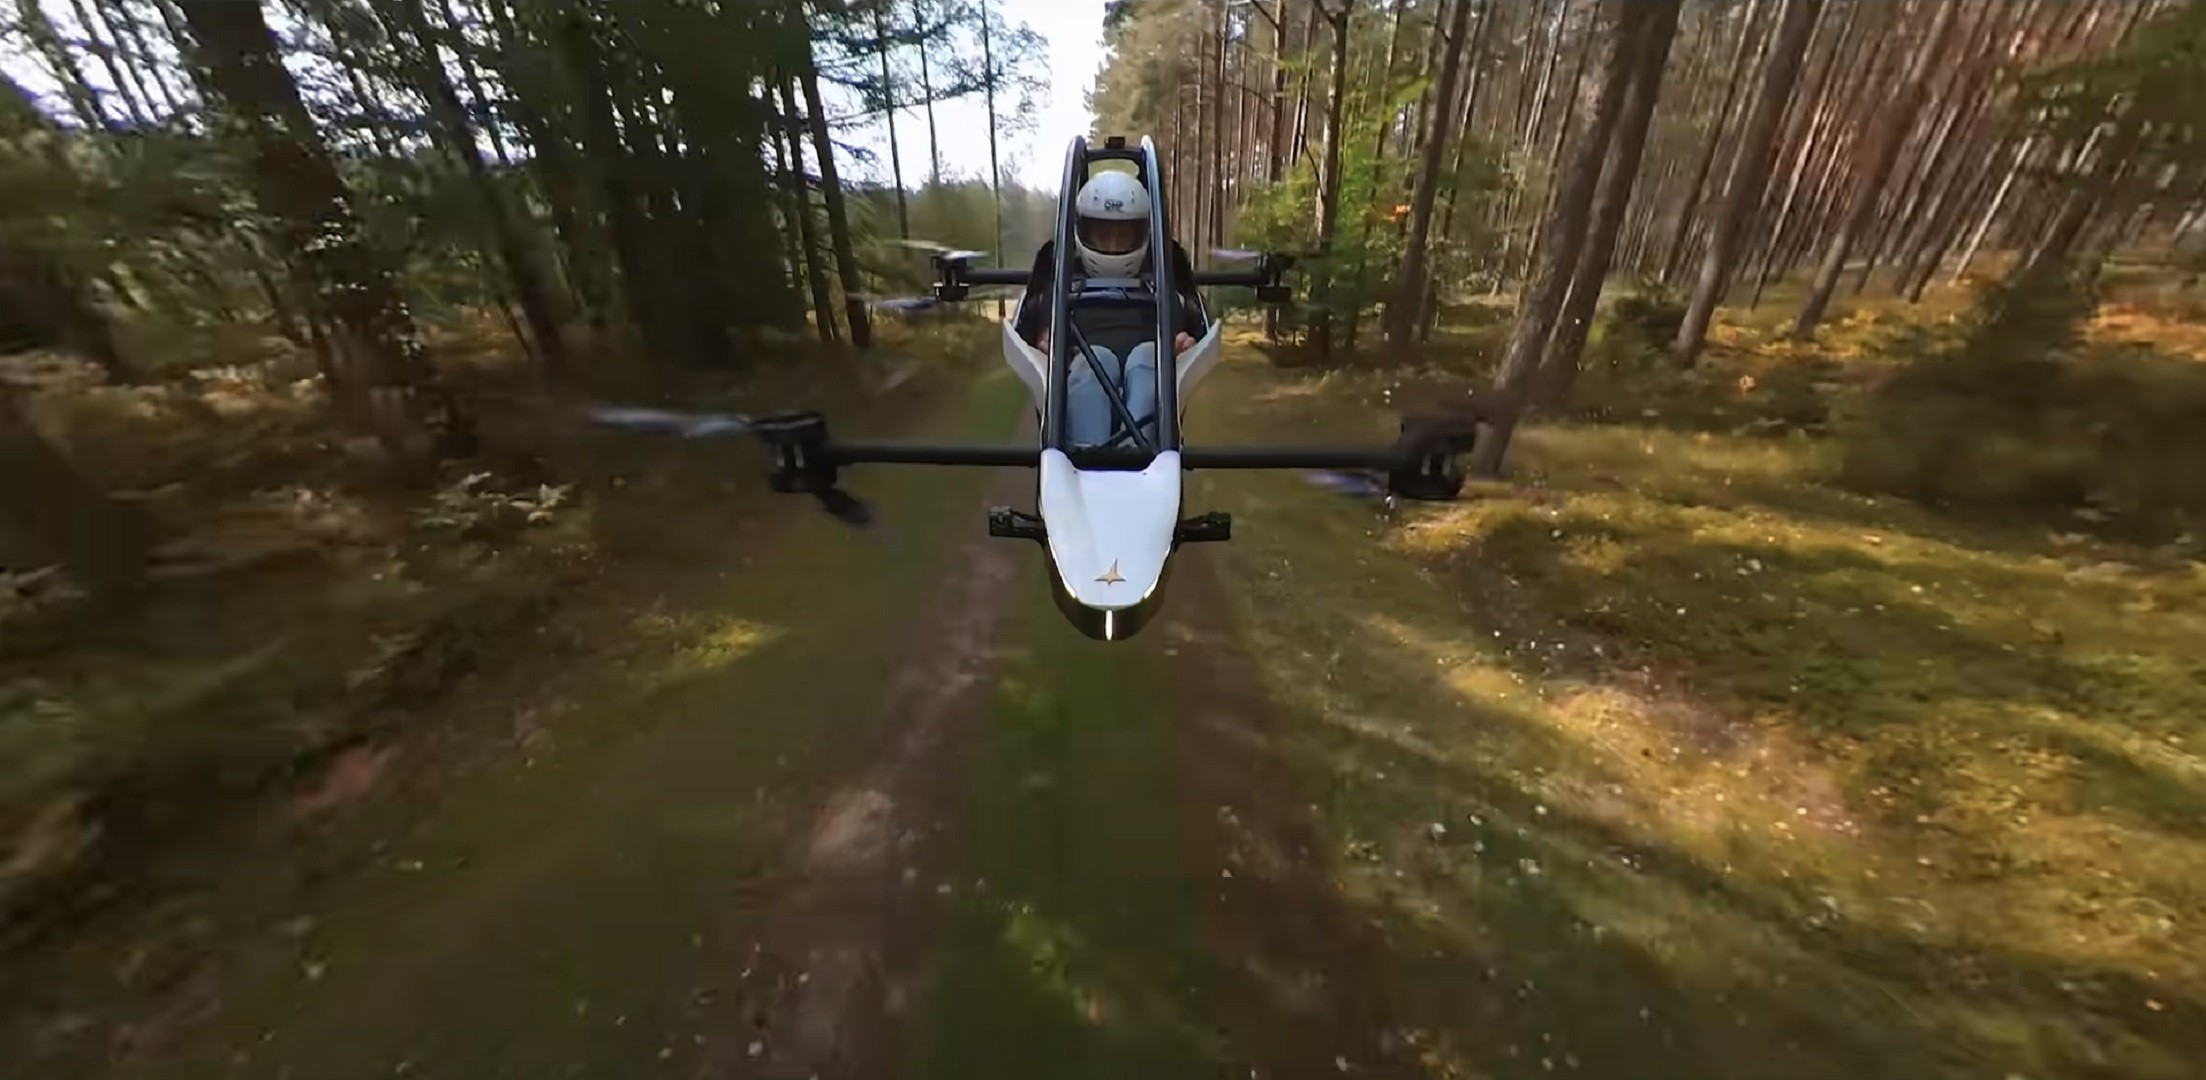 “The first time I flew it, I felt amazing – it's completely vibration free."said its creator